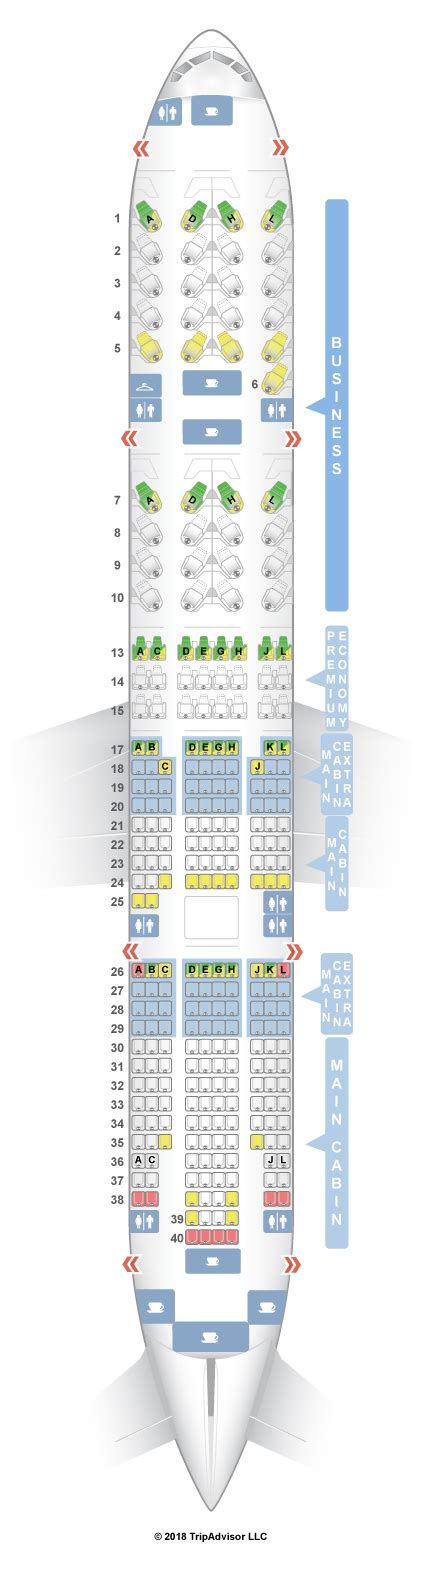 boeing 777 seating chart american